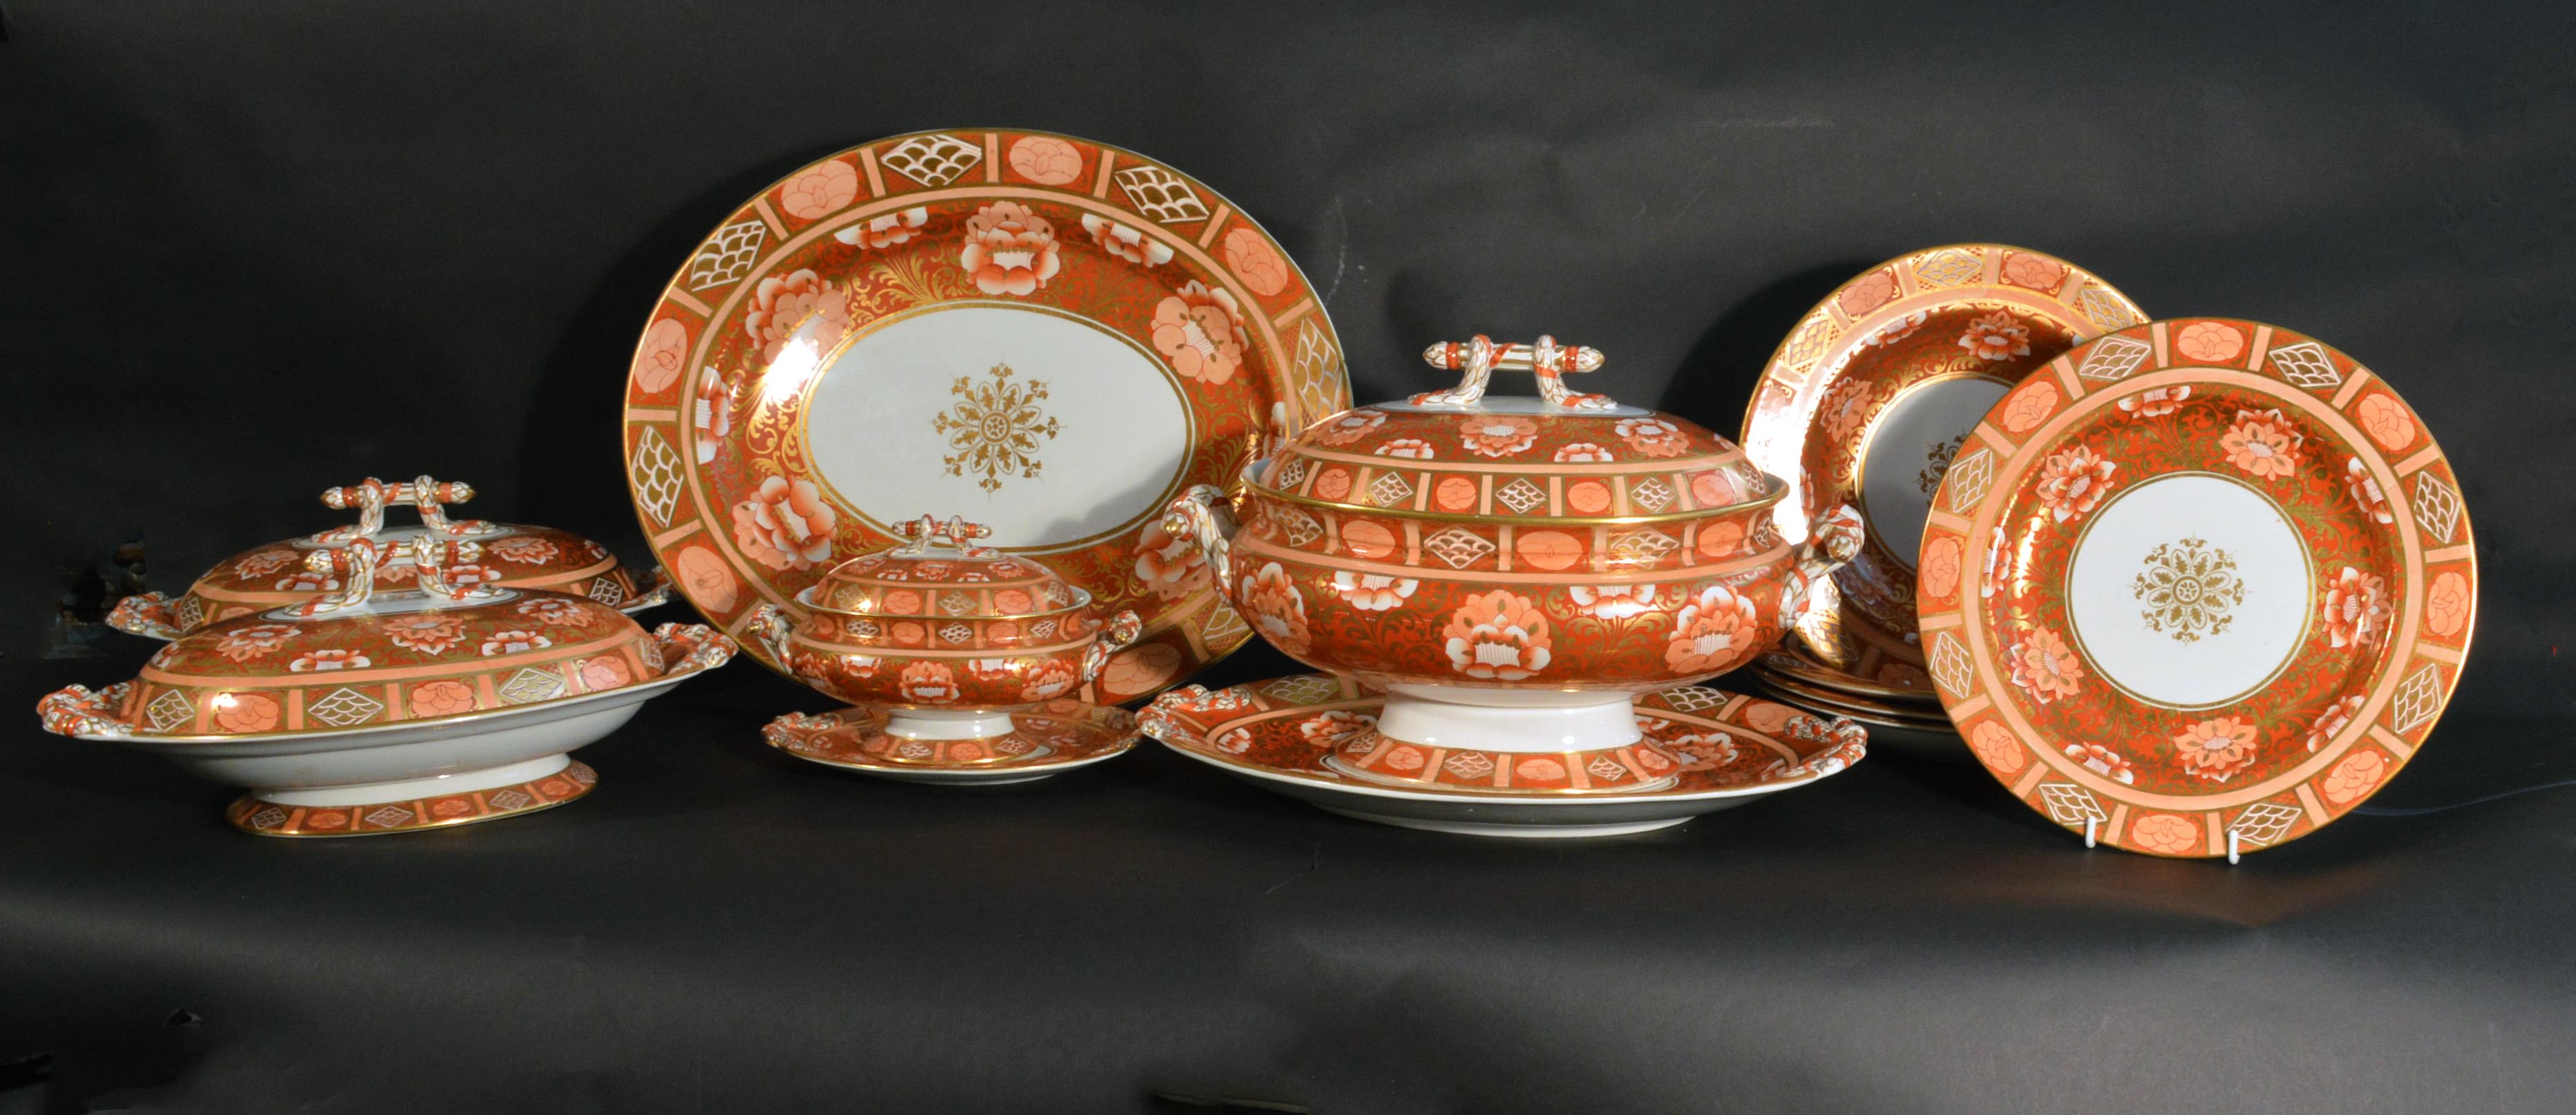 Arts and Crafts Ashworth Brothers Ironstone Dinner Service, circa 1893, Forty-Five Pieces,